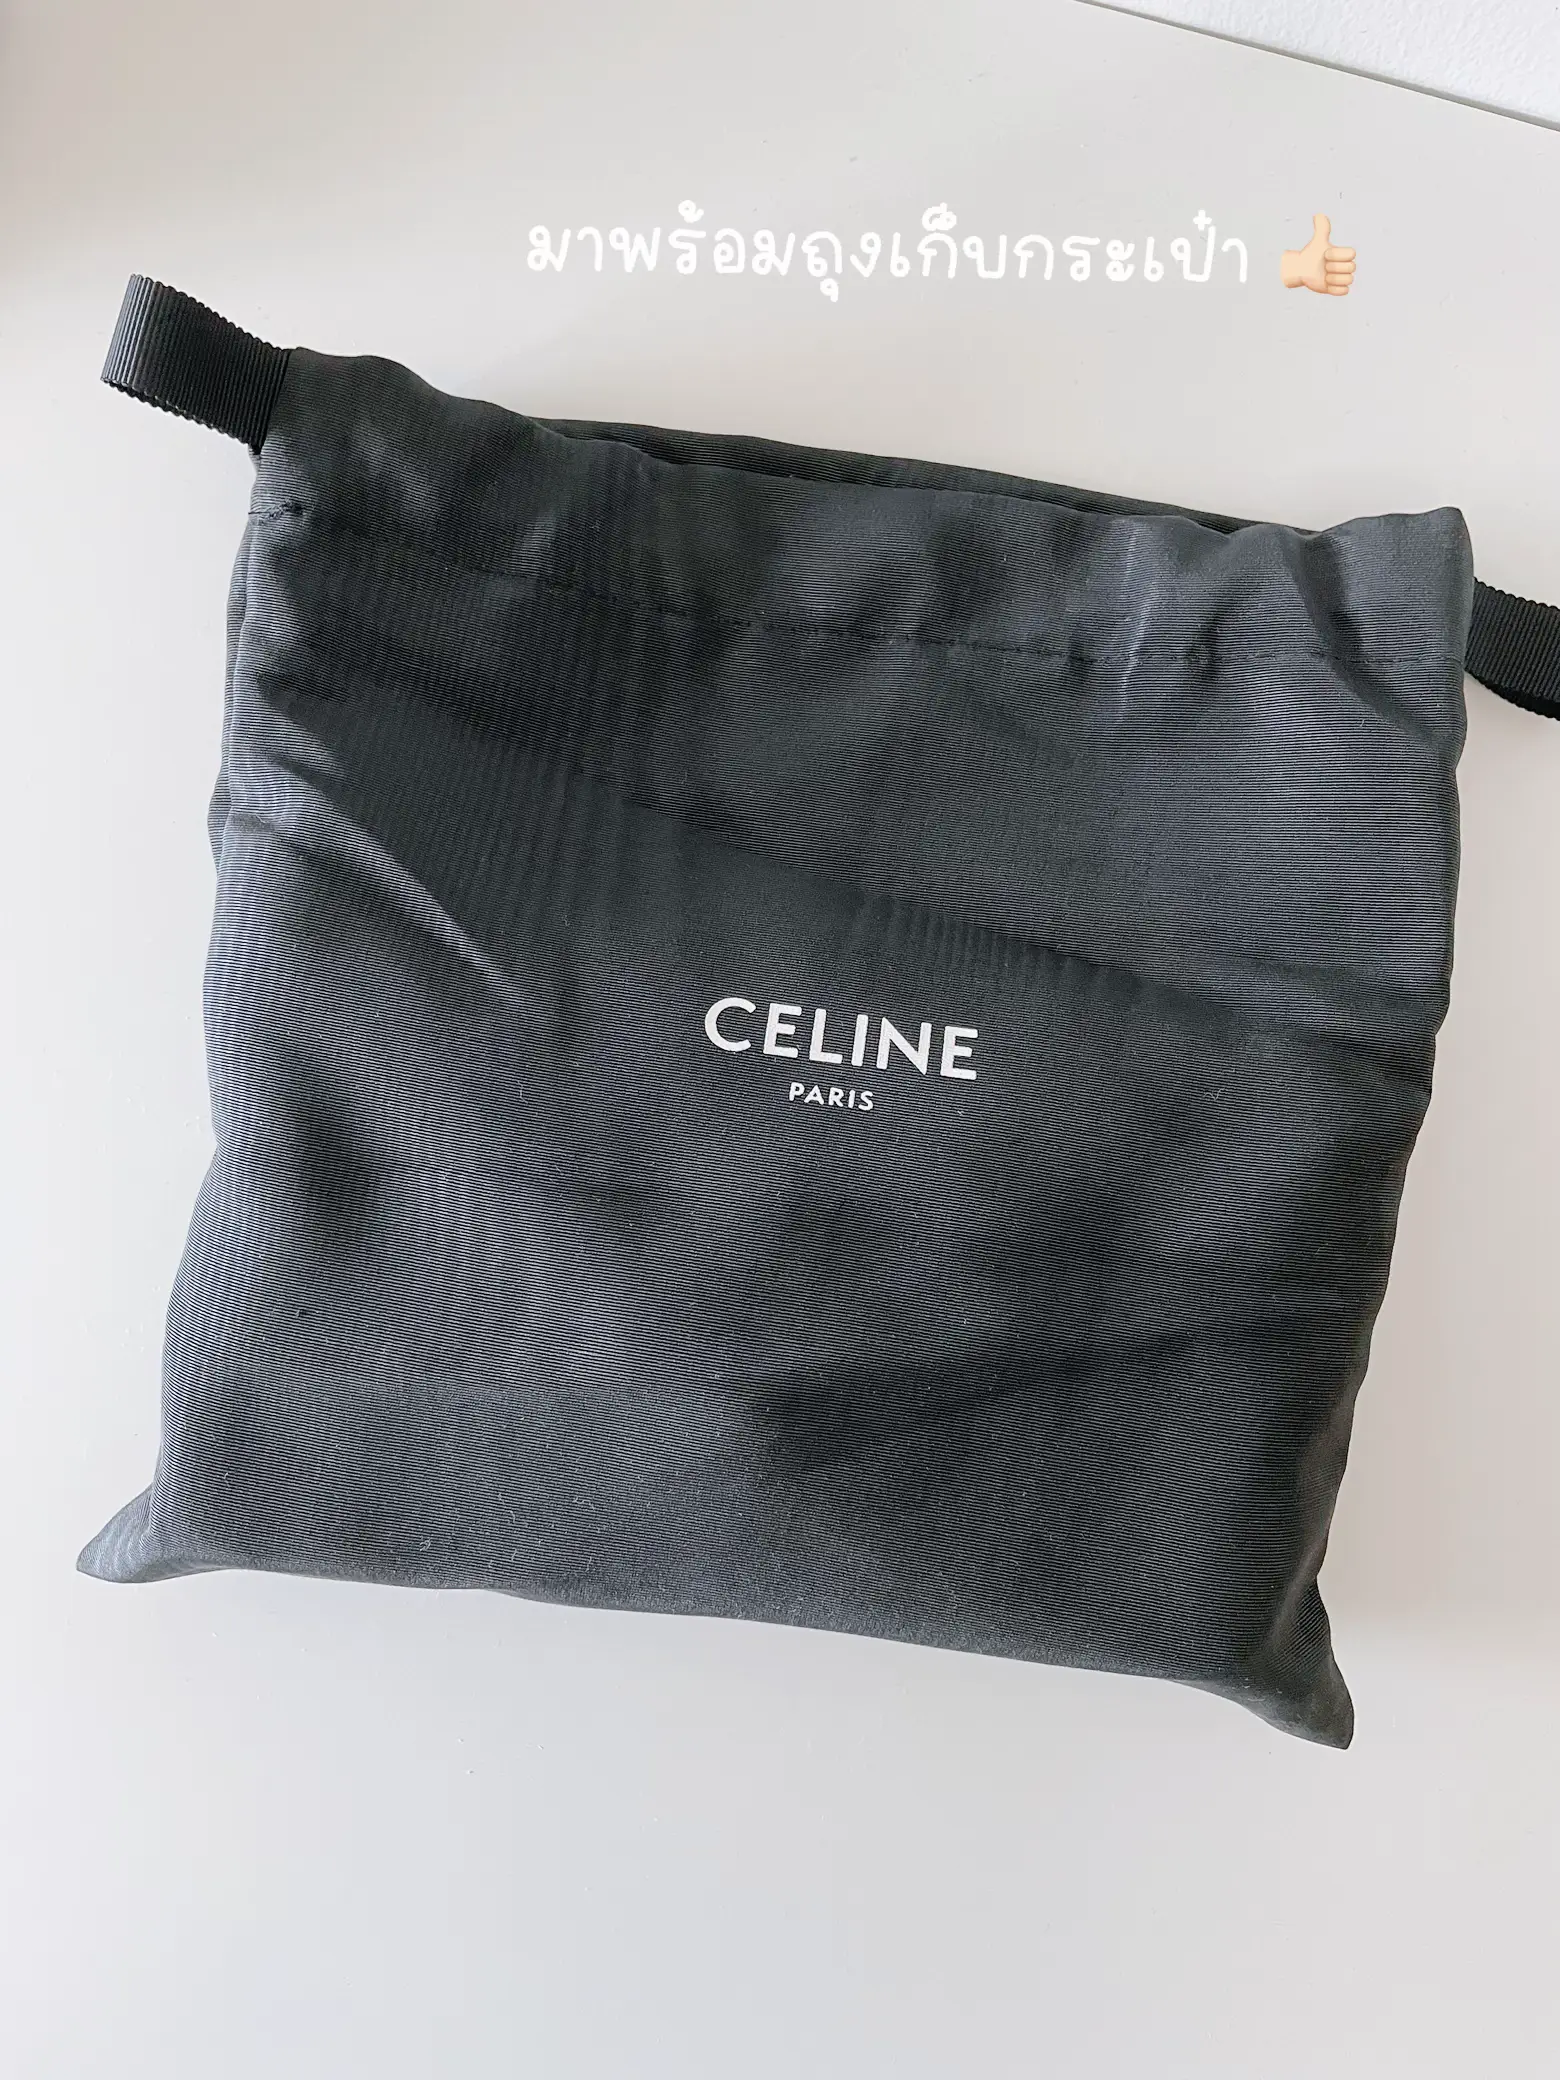 Celine Nano Luggage Review  What's In My Bag - Cat's Daily Living